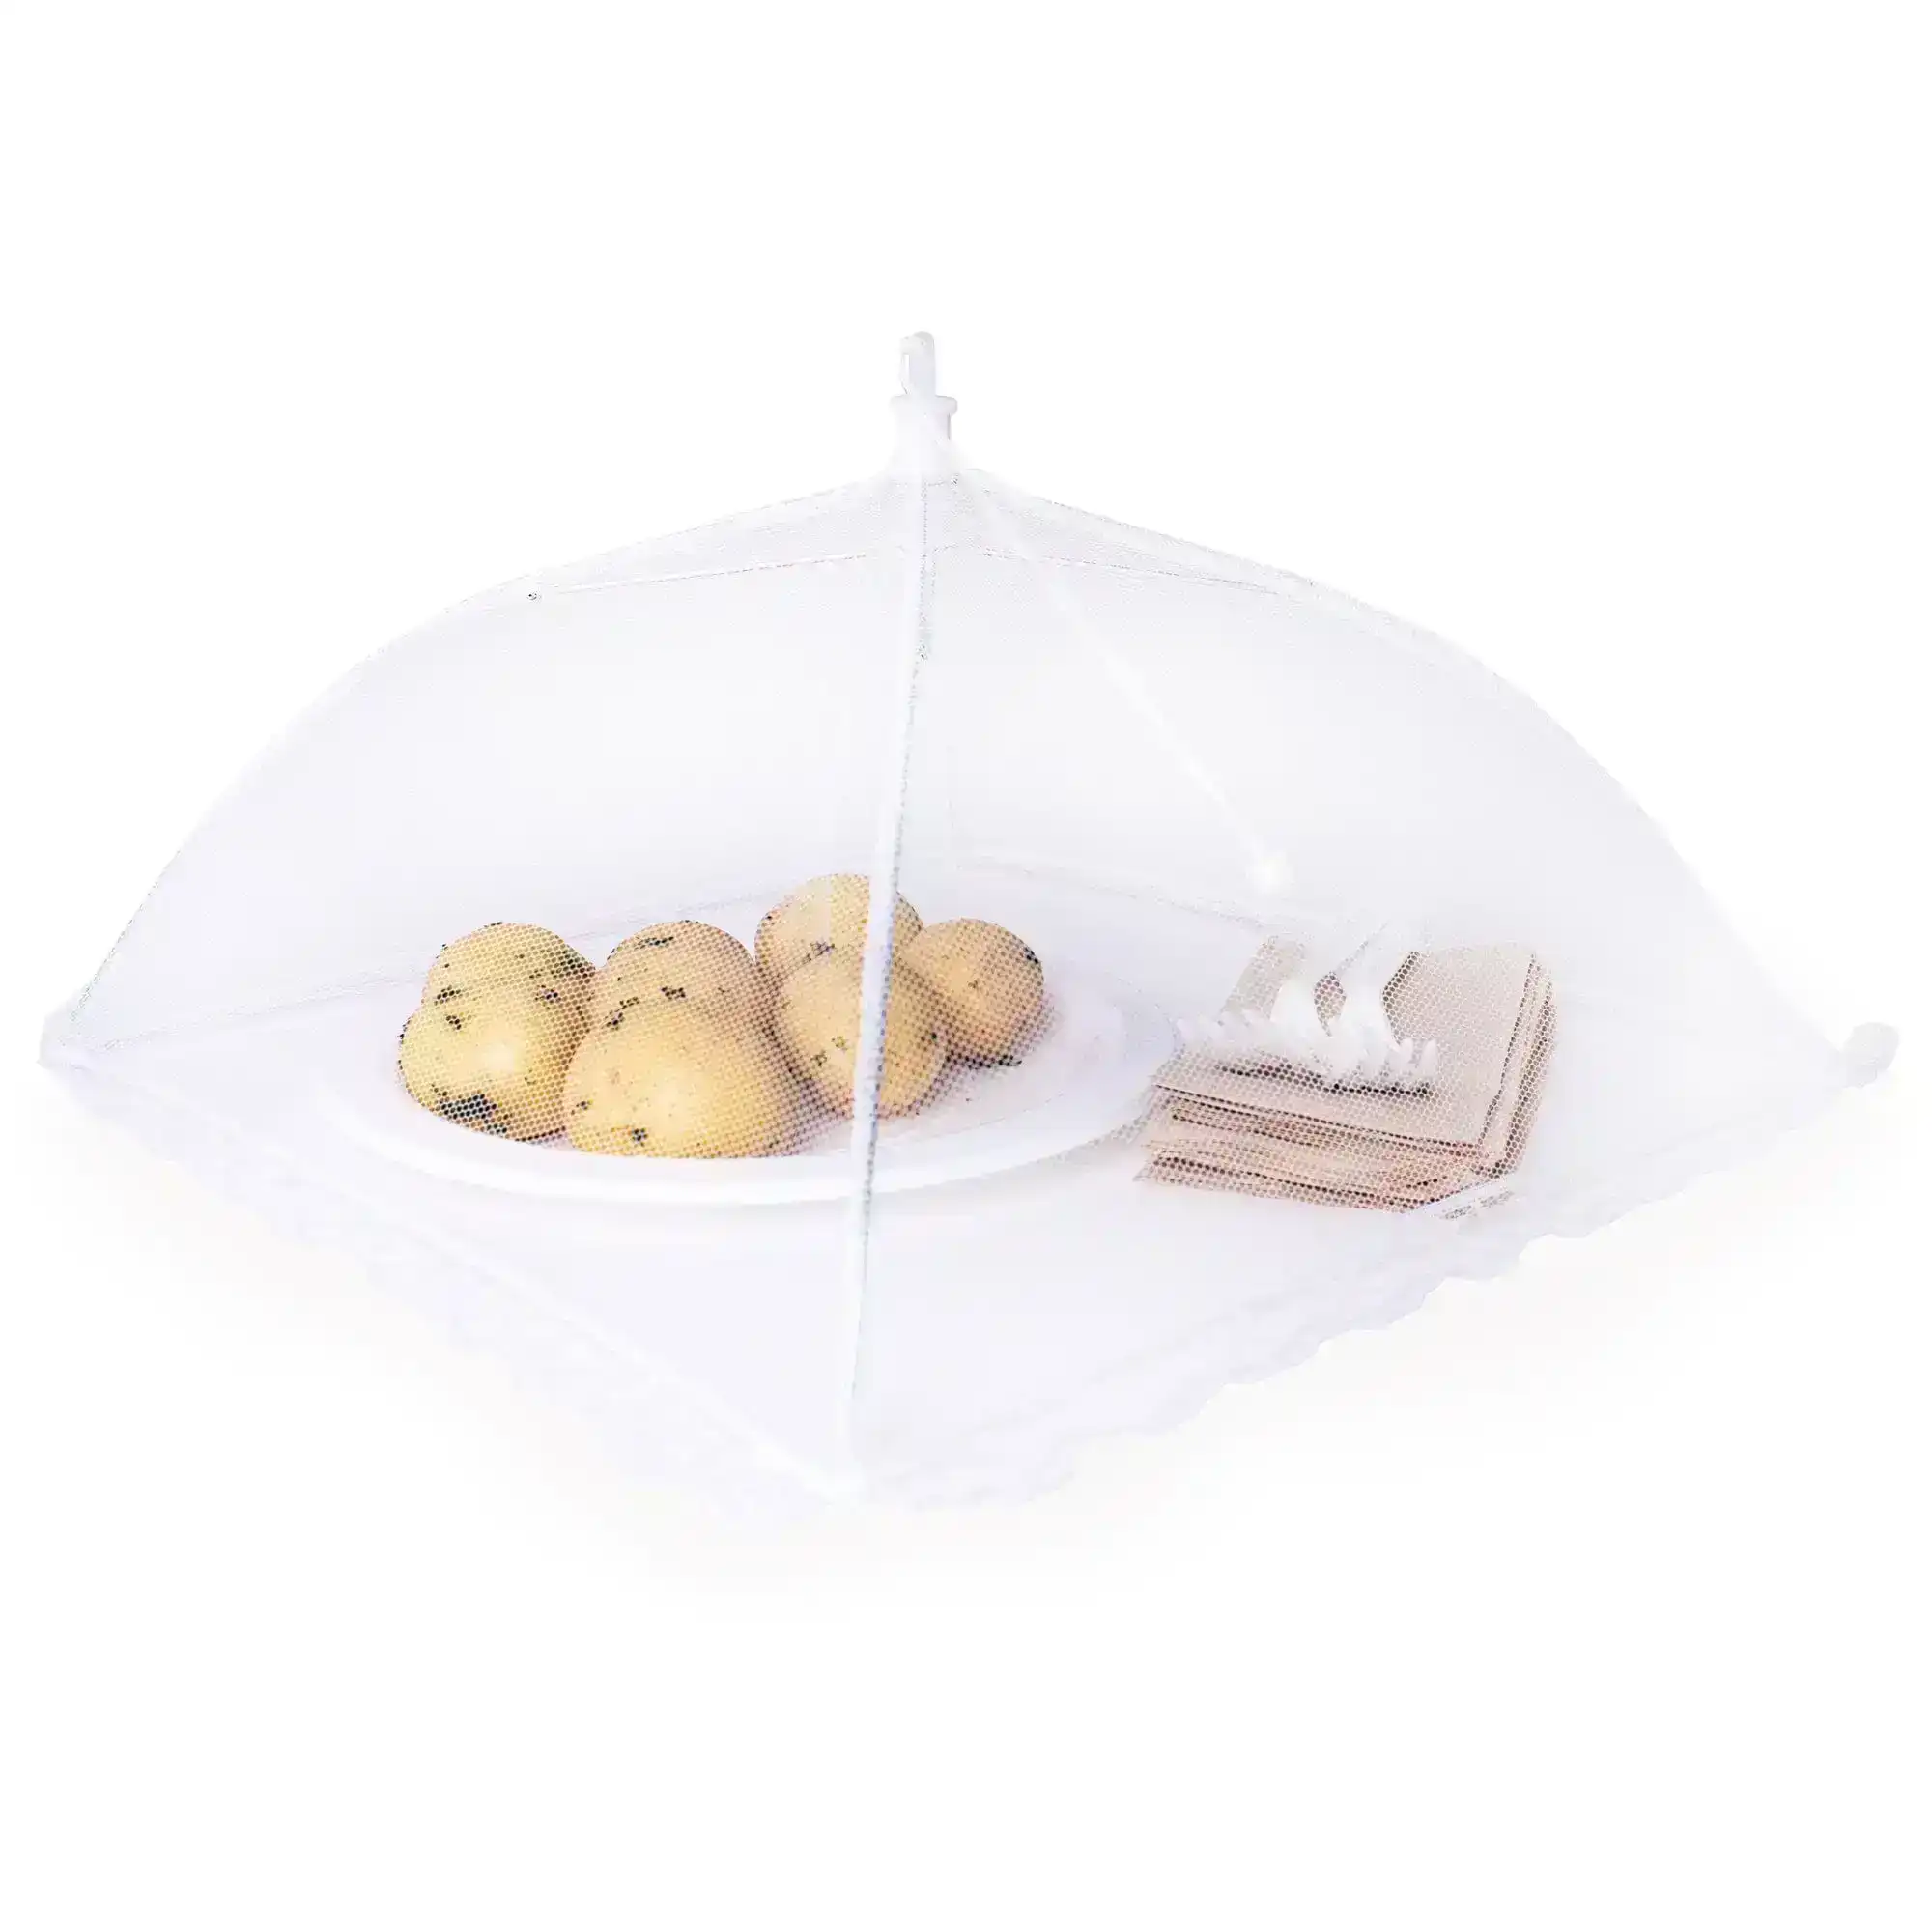 43cm Square Net Food Cover